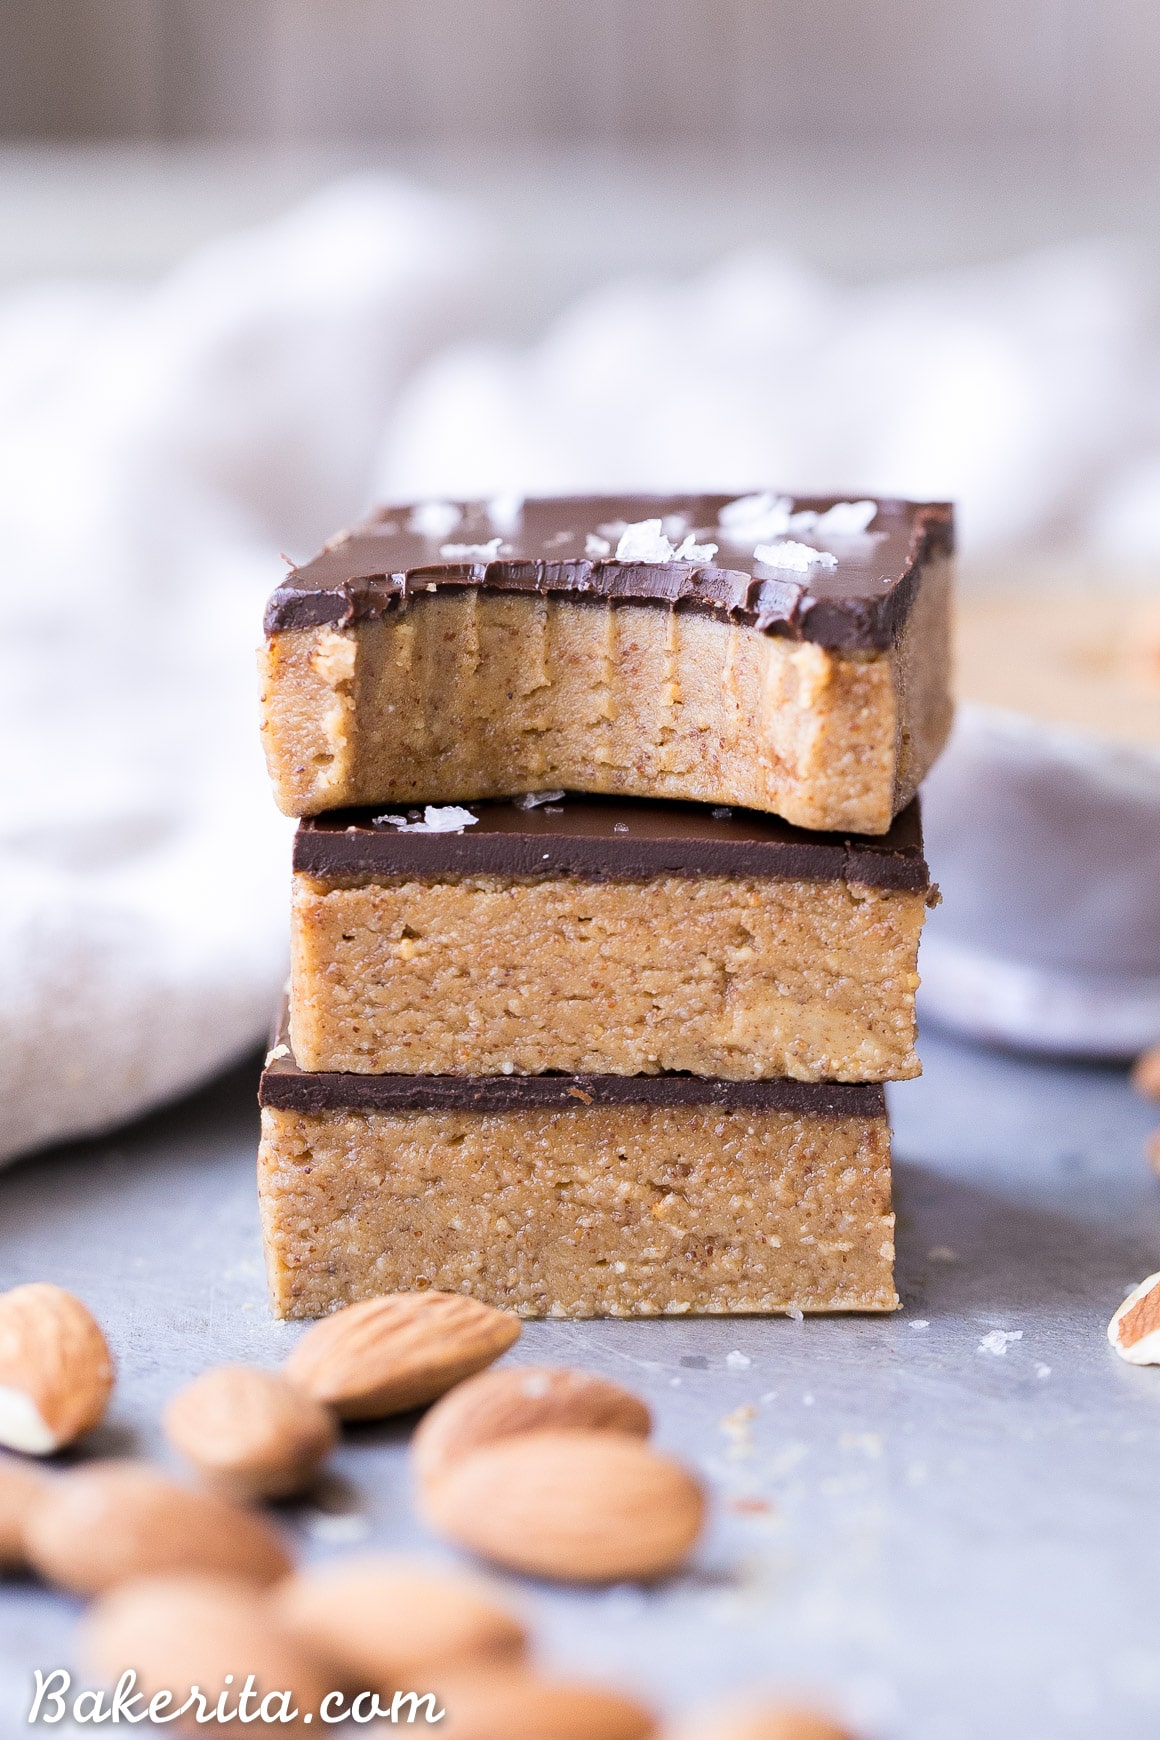 These No Bake Chocolate Almond Butter Bars are easy to make with just five ingredients and no baking necessary! You've got to sink your teeth into these rich gluten free, paleo and vegan bars.